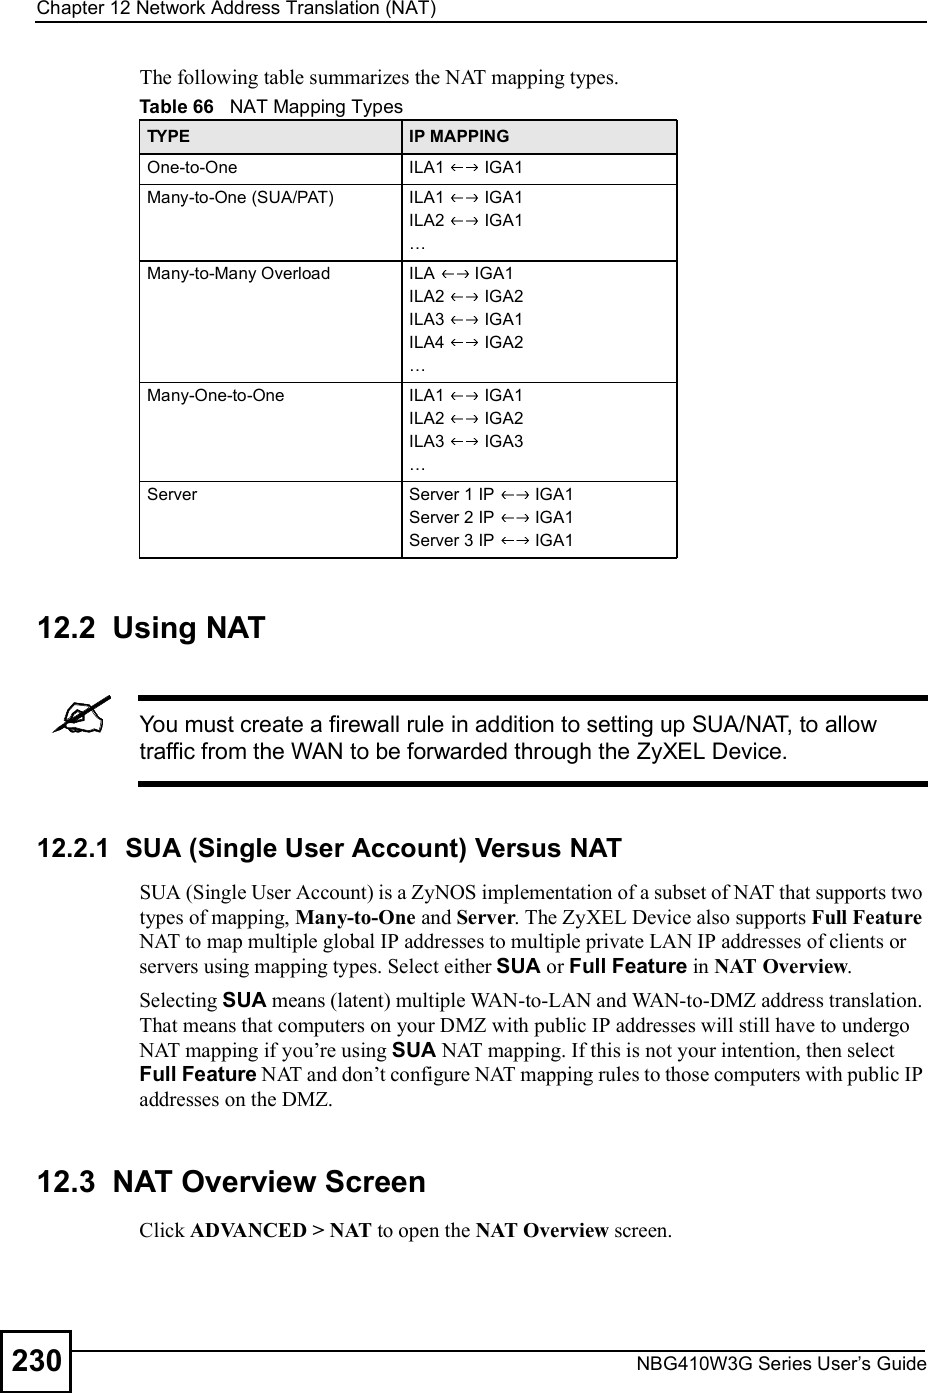 Chapter 12Network Address Translation (NAT)NBG410W3G Series User s Guide230The following table summarizes the NAT mapping types.12.2  Using NATYou must create a firewall rule in addition to setting up SUA/NAT, to allow traffic from the WAN to be forwarded through the ZyXEL Device.12.2.1  SUA (Single User Account) Versus NATSUA (Single User Account) is a ZyNOS implementation of a subset of NAT that supports two types of mapping, Many-to-One and Server. The ZyXEL Device also supports Full Feature NAT to map multiple global IP addresses to multiple private LAN IP addresses of clients or servers using mapping types. Select either SUA or Full Feature in NAT Overview. Selecting SUA means (latent) multiple WAN-to-LAN and WAN-to-DMZ address translation. That means that computers on your DMZ with public IP addresses will still have to undergo NAT mapping if you!re using SUA NAT mapping. If this is not your intention, then select Full Feature NAT and don!t configure NAT mapping rules to those computers with public IP addresses on the DMZ.12.3  NAT Overview Screen  Click ADVANCED &gt; NAT to open the NAT Overview screen. Table 66   NAT Mapping TypesTYPE IP MAPPINGOne-to-One ILA1   IGA1Many-to-One (SUA/PAT) ILA1   IGA1ILA2   IGA1&amp;Many-to-Many Overload ILA   IGA1ILA2   IGA2ILA3   IGA1ILA4   IGA2&amp;Many-One-to-One ILA1   IGA1ILA2   IGA2ILA3   IGA3&amp;Server Server 1 IP   IGA1Server 2 IP   IGA1Server 3 IP   IGA1